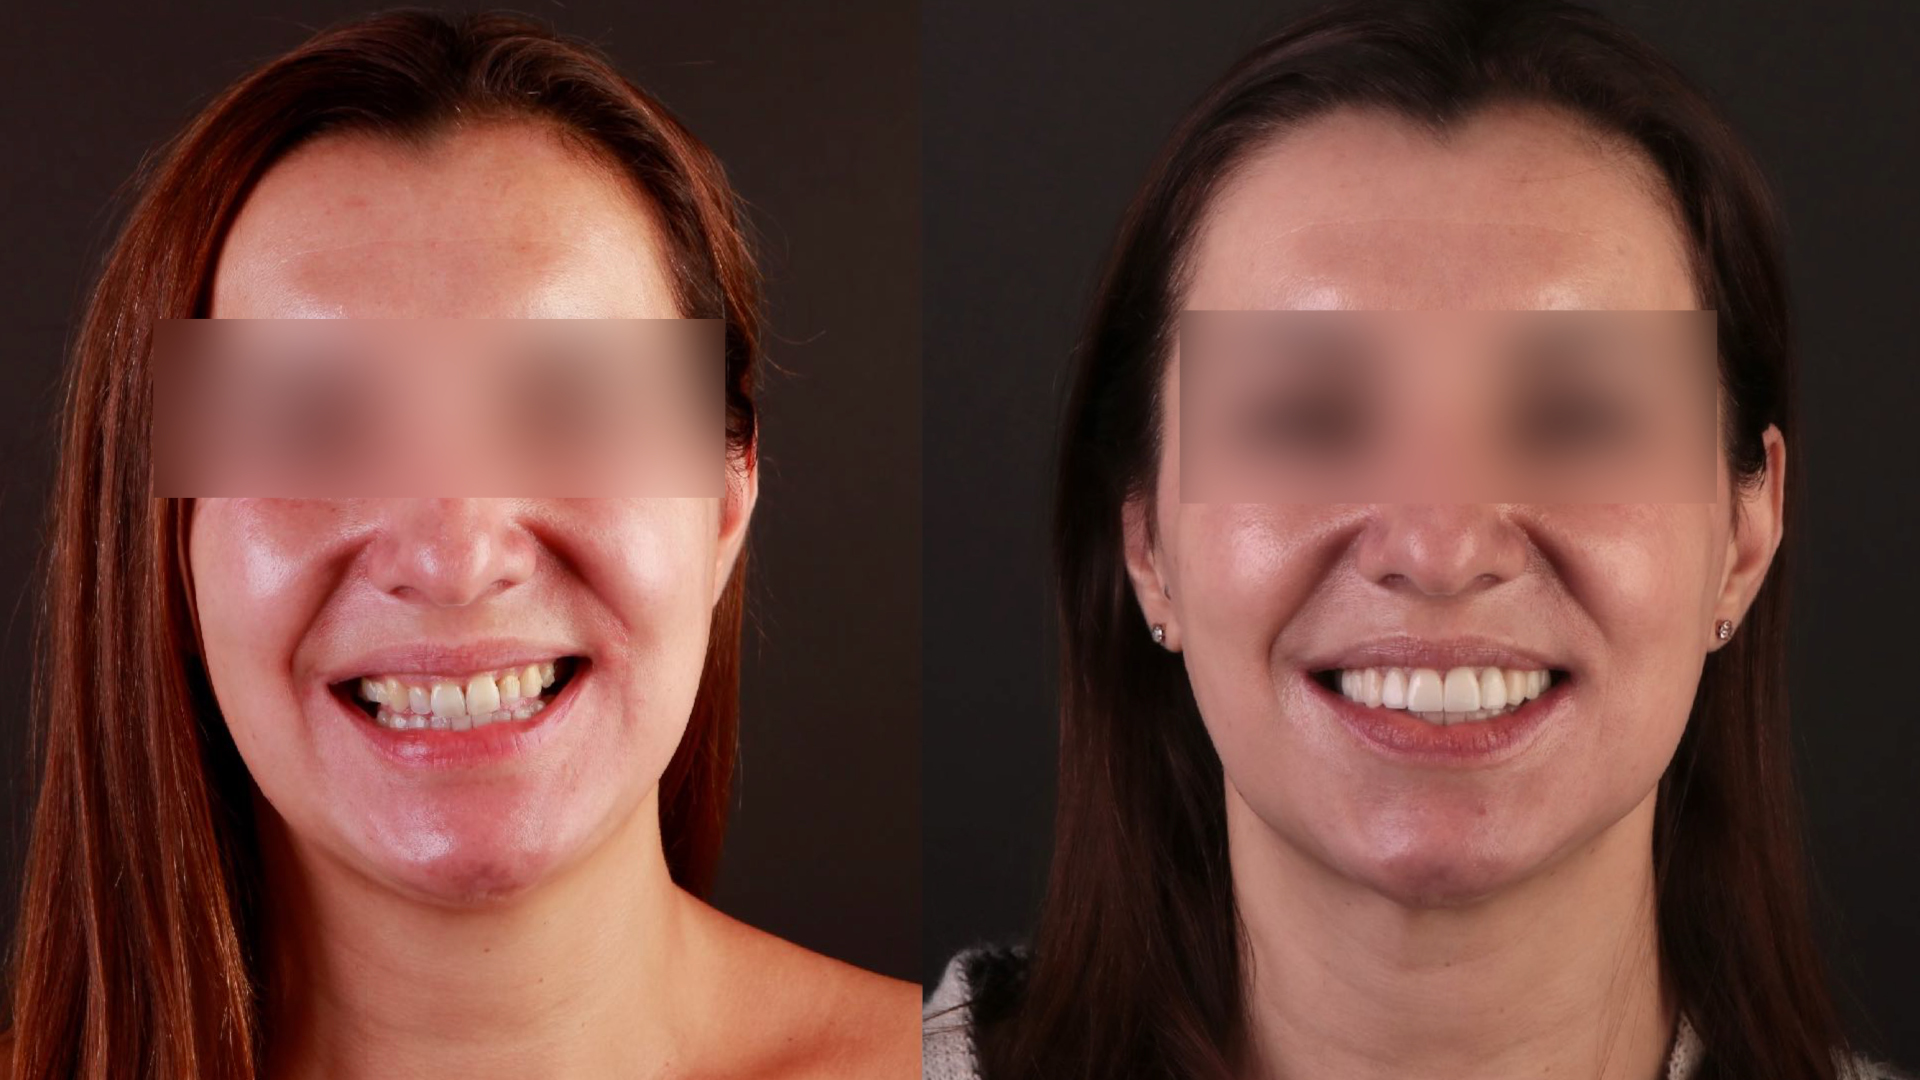 Figs. 7a & b: Comparison of (left) the initial situation with the final result with full-contour veneers, implants and a new vertical dimension after the aligner treatment.